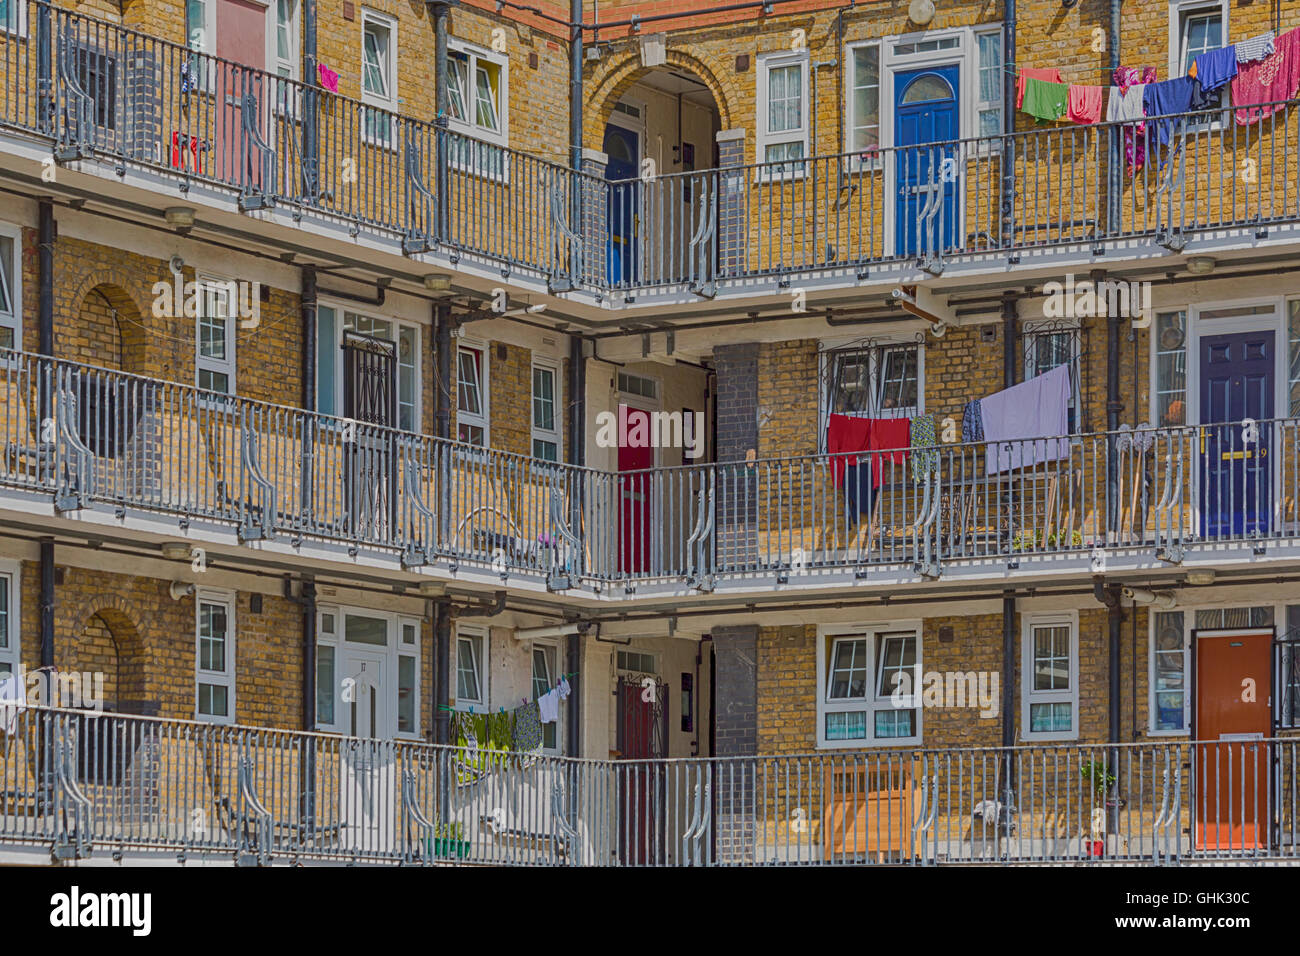 Flats, apartments, social housing, council housing in Bethnal Green area, London UK in July - HDR effect Stock Photo